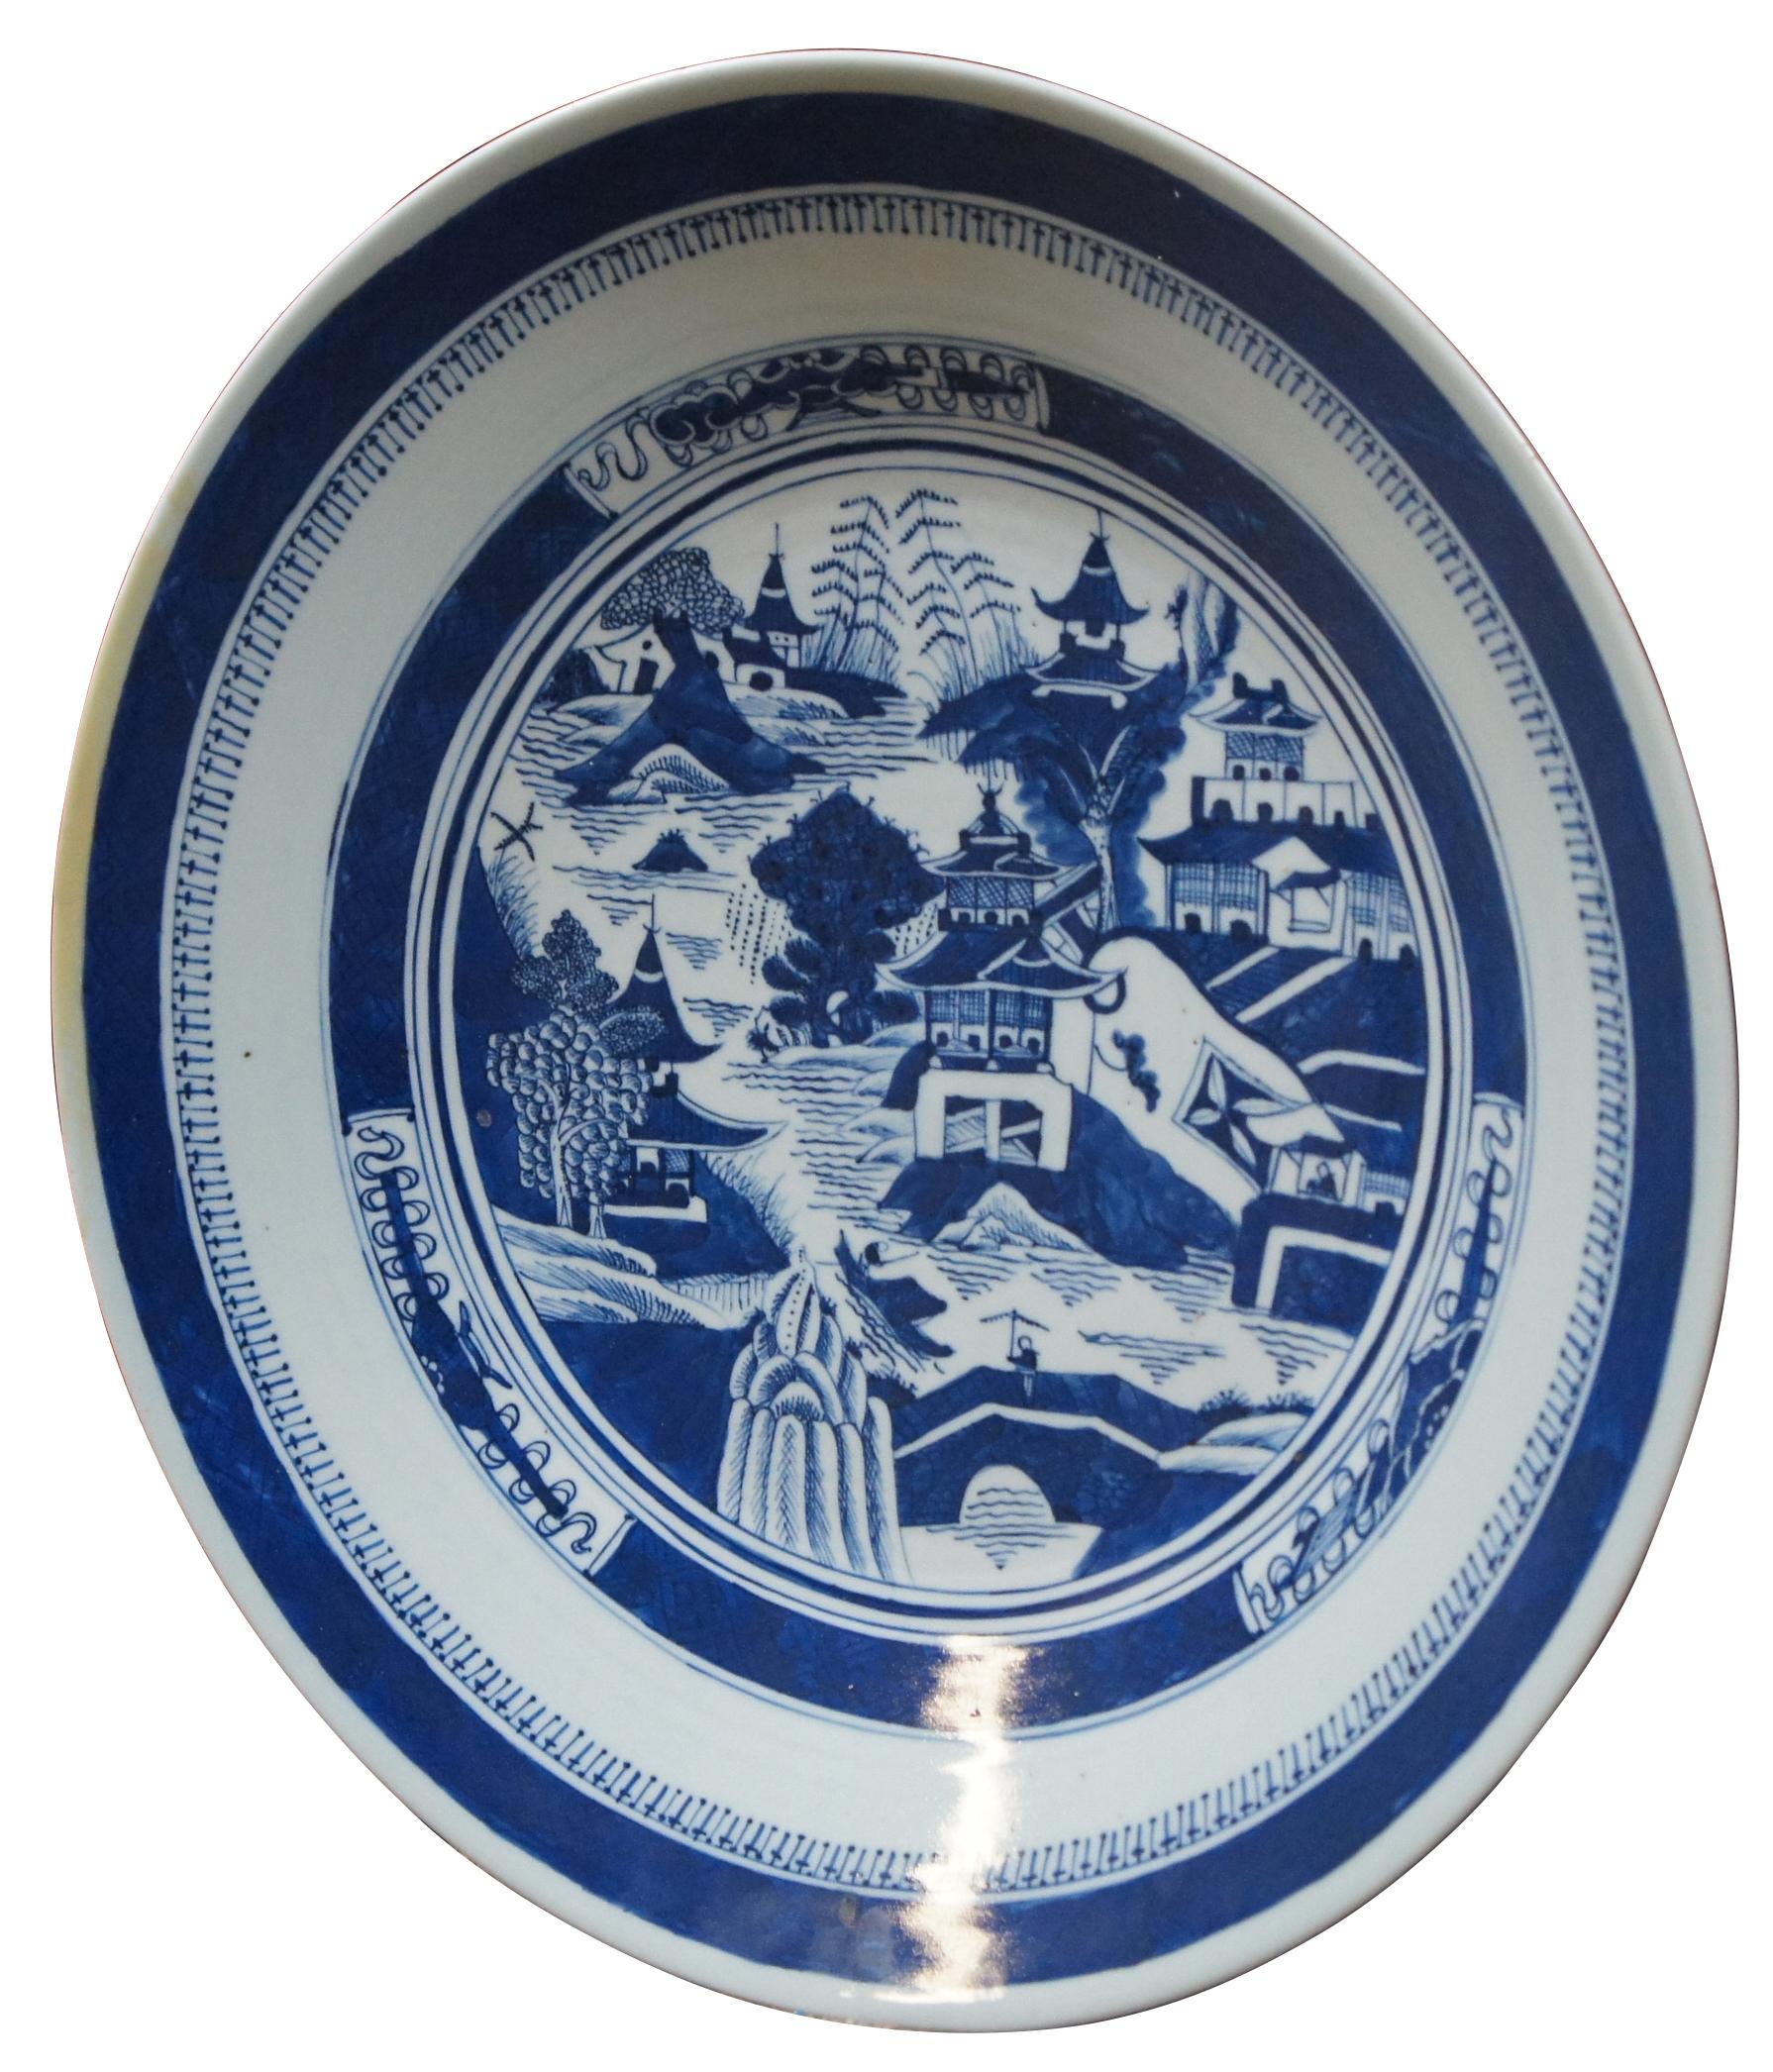 “Canton and Nanking are both patterns of dishes made in China from the late 1700s to the early 1900s. Both are named for cities in China where the dishes were thought to have been made, but we now know that Nanking was the port used to ship the